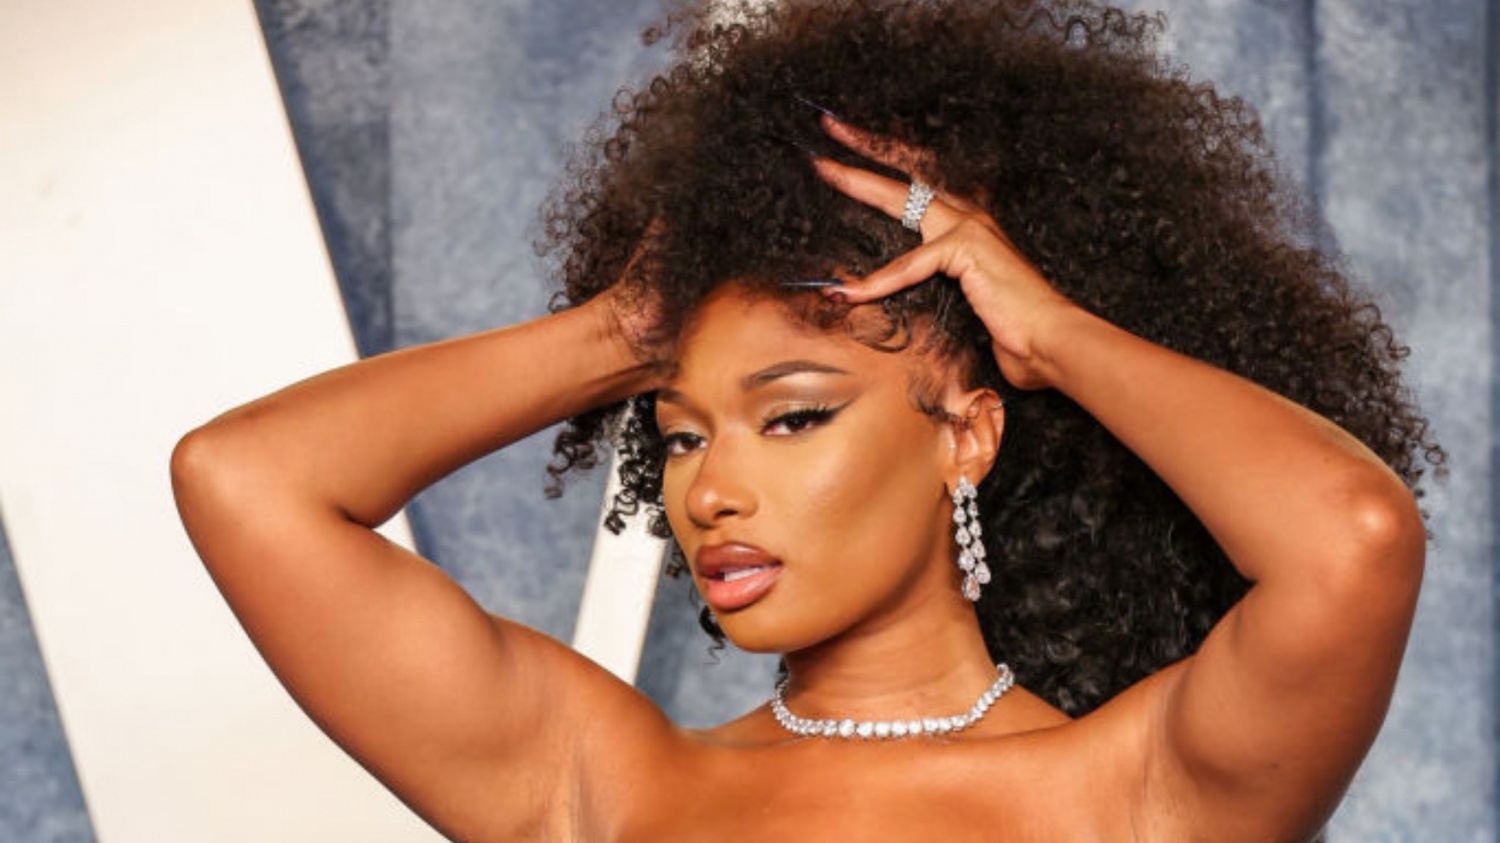 Megan Thee Stallion strips down completely for sexy ‘Women’s Health’ cover shoot